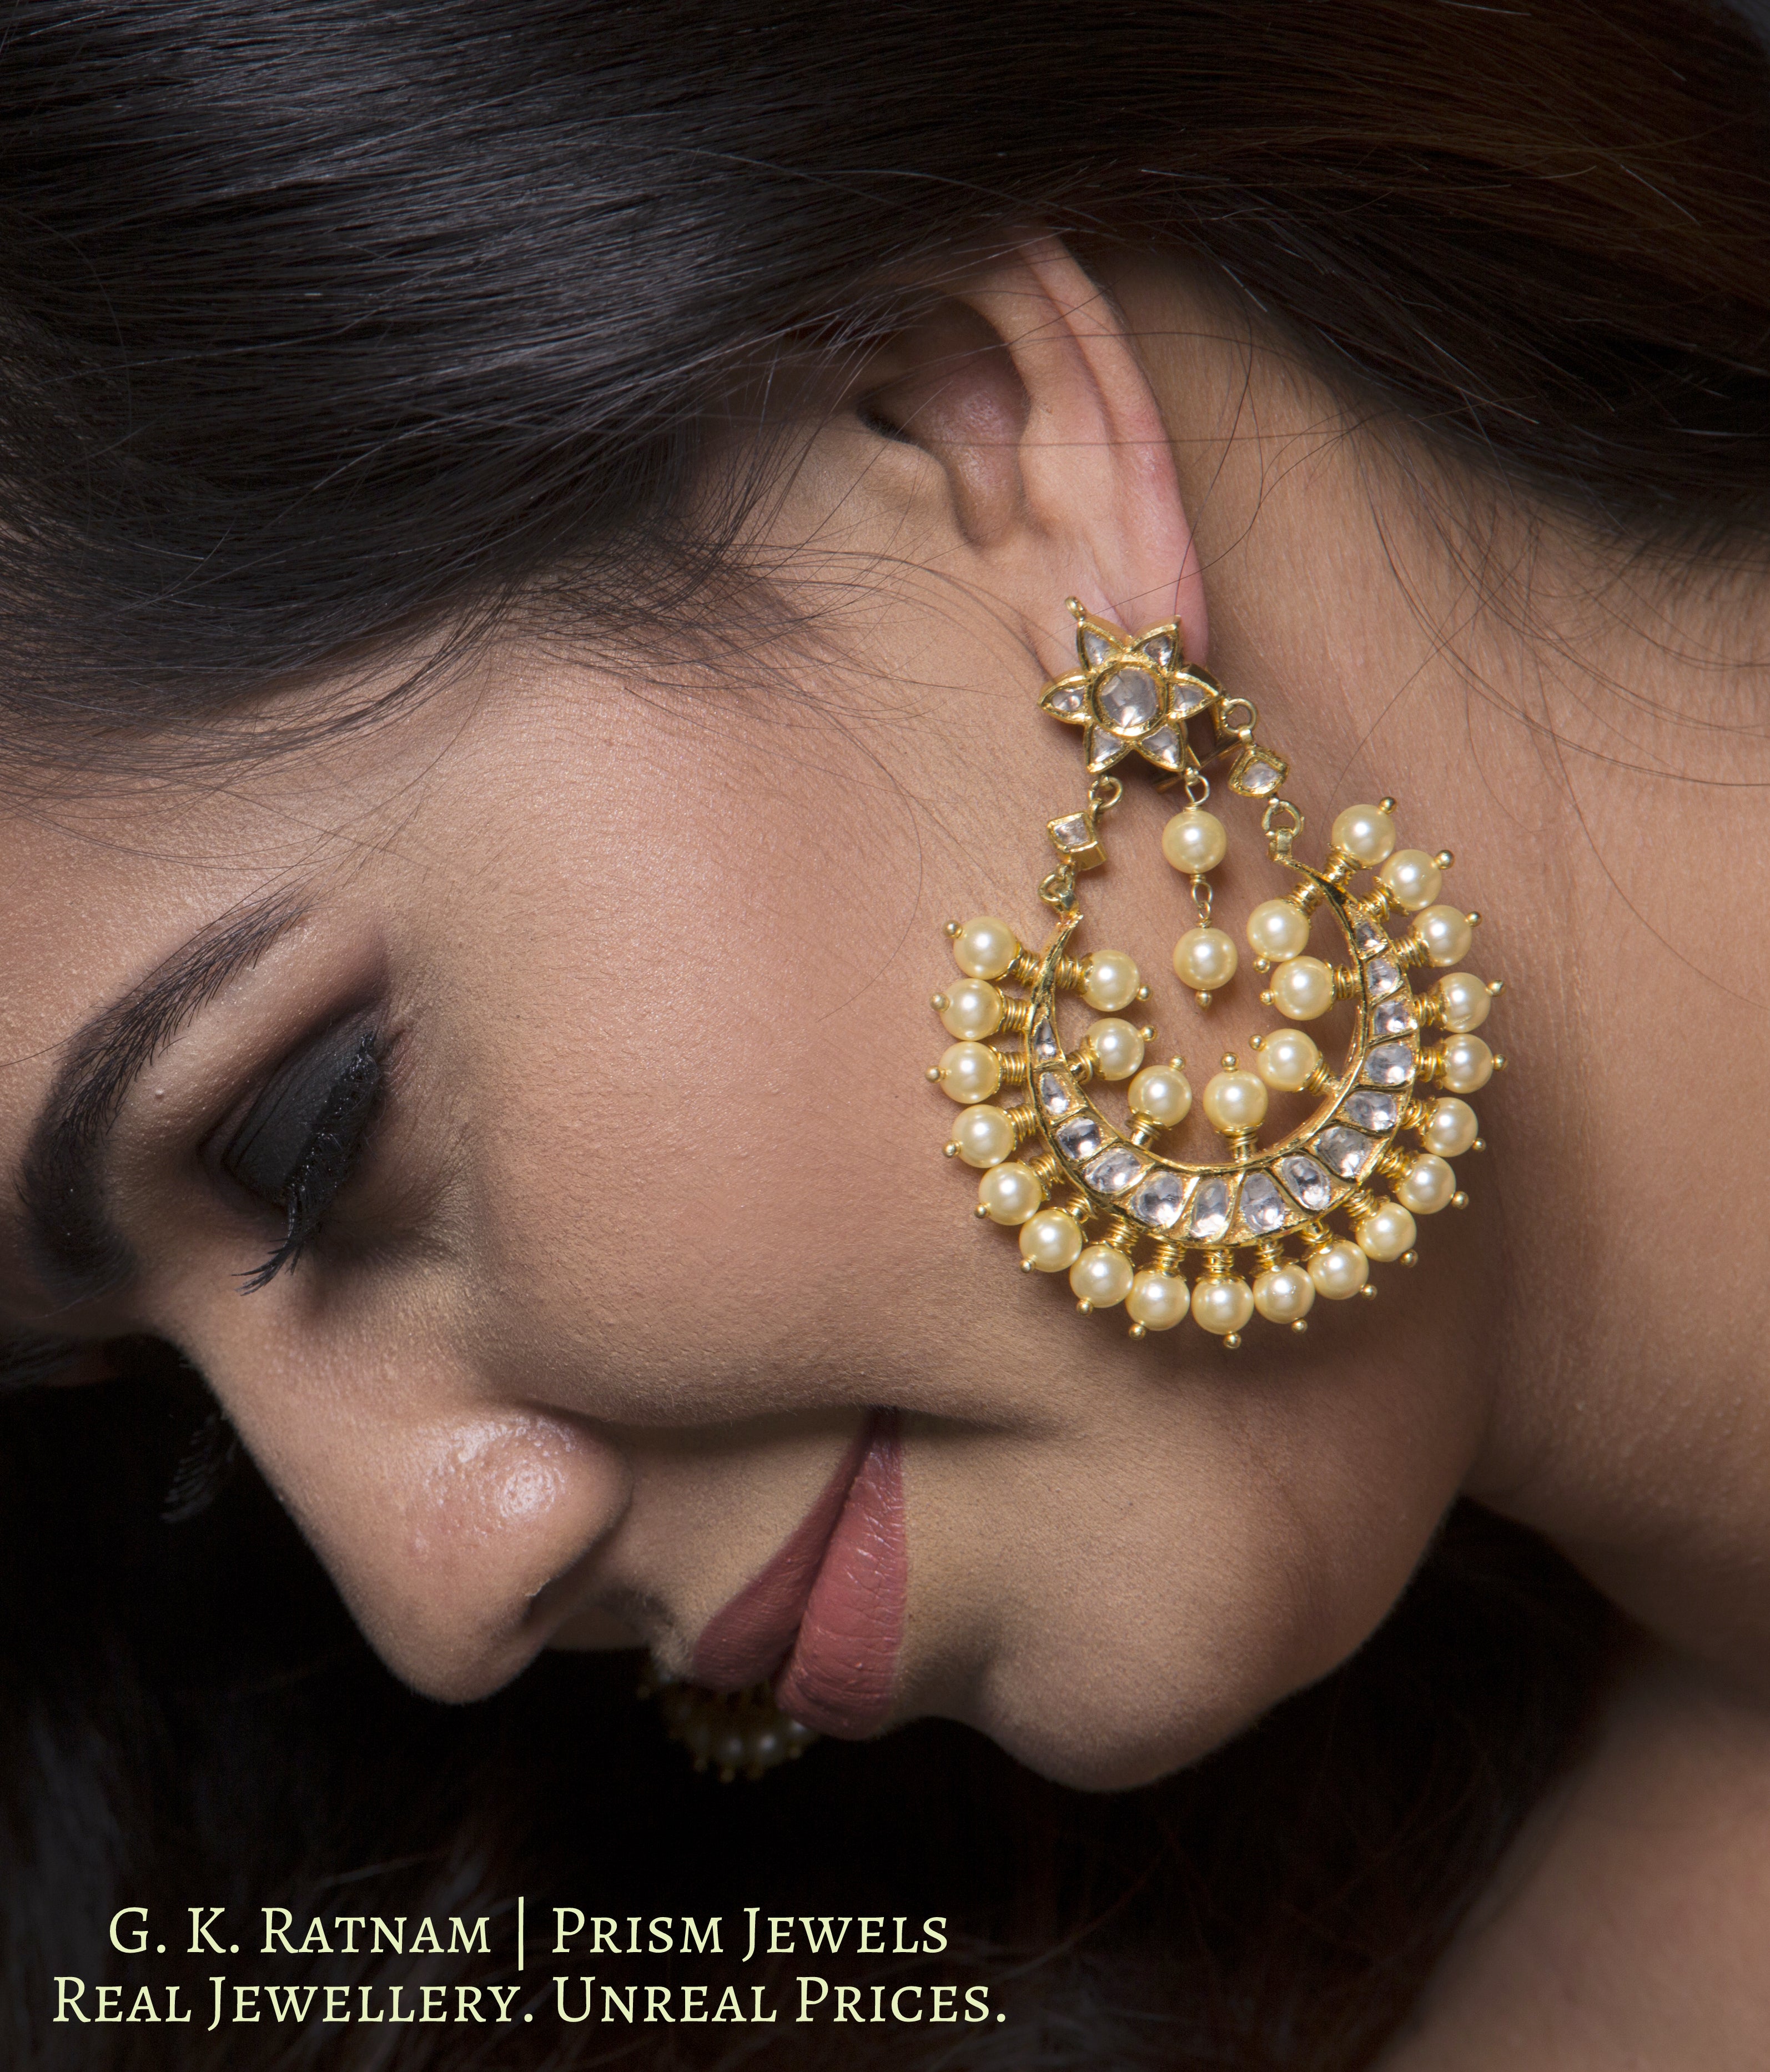 18k Gold and Diamond Polki Chand Bali Earrings with Pearls - G. K. Ratnam